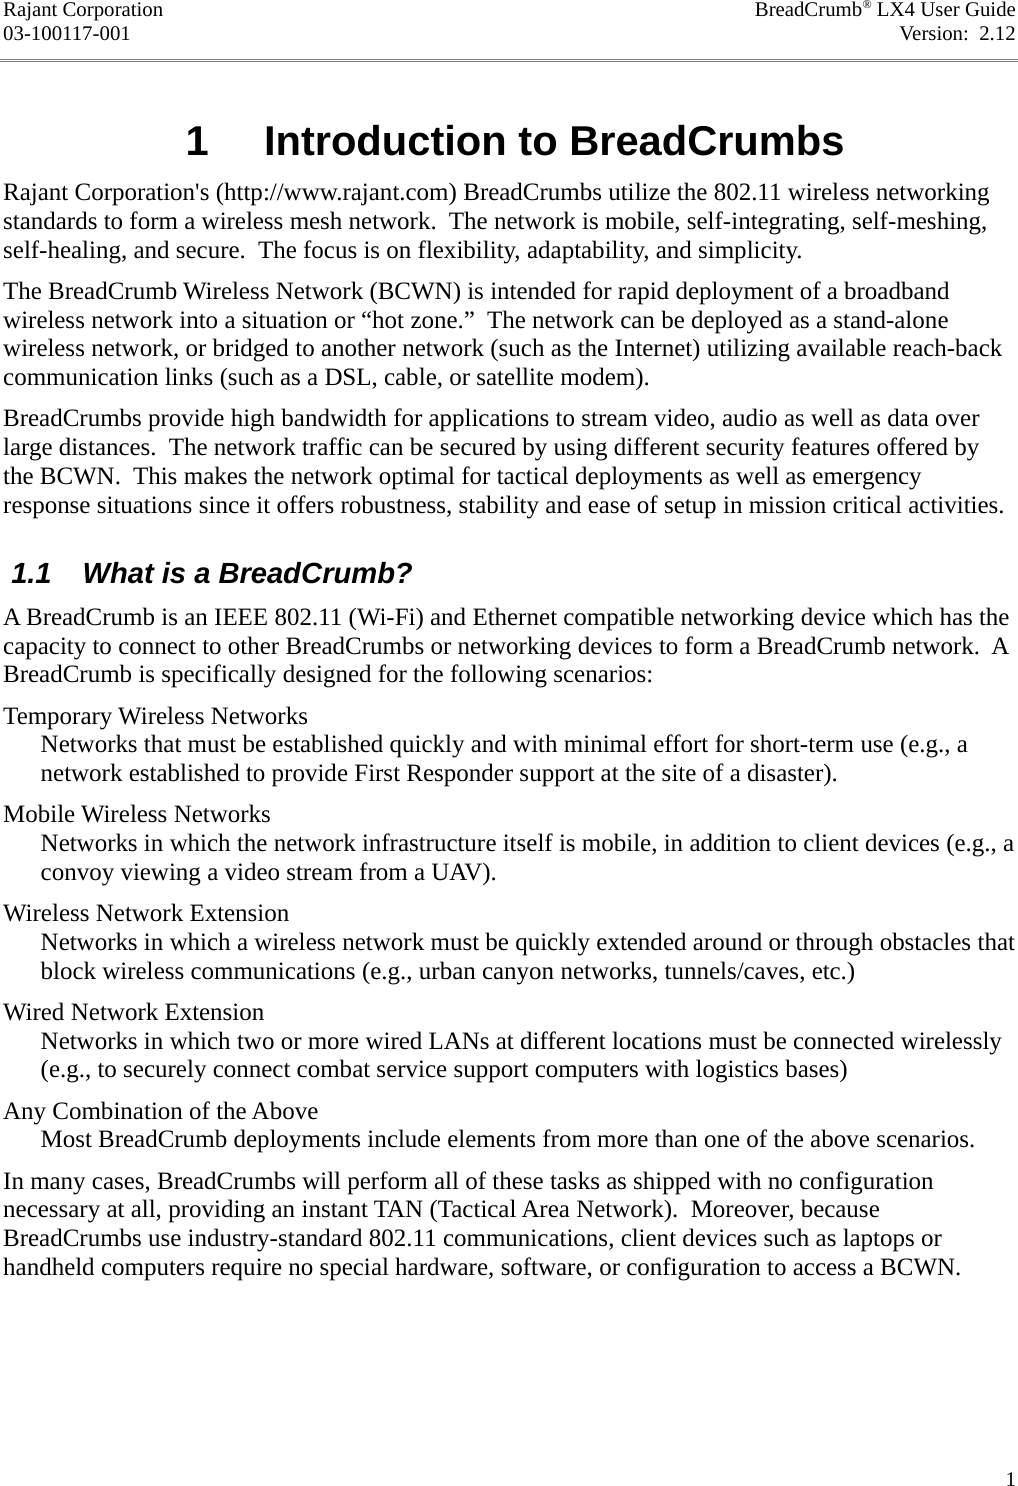 Rajant Corporation BreadCrumb® LX4 User Guide03-100117-001 Version:  2.12 1  Introduction to BreadCrumbsRajant Corporation&apos;s (http://www.rajant.com) BreadCrumbs utilize the 802.11 wireless networking standards to form a wireless mesh network.  The network is mobile, self-integrating, self-meshing, self-healing, and secure.  The focus is on flexibility, adaptability, and simplicity.The BreadCrumb Wireless Network (BCWN) is intended for rapid deployment of a broadband wireless network into a situation or “hot zone.”  The network can be deployed as a stand-alone wireless network, or bridged to another network (such as the Internet) utilizing available reach-back communication links (such as a DSL, cable, or satellite modem).BreadCrumbs provide high bandwidth for applications to stream video, audio as well as data over large distances.  The network traffic can be secured by using different security features offered by the BCWN.  This makes the network optimal for tactical deployments as well as emergency response situations since it offers robustness, stability and ease of setup in mission critical activities. 1.1  What is a BreadCrumb?A BreadCrumb is an IEEE 802.11 (Wi-Fi) and Ethernet compatible networking device which has the capacity to connect to other BreadCrumbs or networking devices to form a BreadCrumb network.  A BreadCrumb is specifically designed for the following scenarios:Temporary Wireless NetworksNetworks that must be established quickly and with minimal effort for short-term use (e.g., a network established to provide First Responder support at the site of a disaster).Mobile Wireless NetworksNetworks in which the network infrastructure itself is mobile, in addition to client devices (e.g., a convoy viewing a video stream from a UAV).Wireless Network ExtensionNetworks in which a wireless network must be quickly extended around or through obstacles that block wireless communications (e.g., urban canyon networks, tunnels/caves, etc.)Wired Network ExtensionNetworks in which two or more wired LANs at different locations must be connected wirelessly (e.g., to securely connect combat service support computers with logistics bases)Any Combination of the AboveMost BreadCrumb deployments include elements from more than one of the above scenarios.In many cases, BreadCrumbs will perform all of these tasks as shipped with no configuration necessary at all, providing an instant TAN (Tactical Area Network).  Moreover, because BreadCrumbs use industry-standard 802.11 communications, client devices such as laptops or handheld computers require no special hardware, software, or configuration to access a BCWN.1